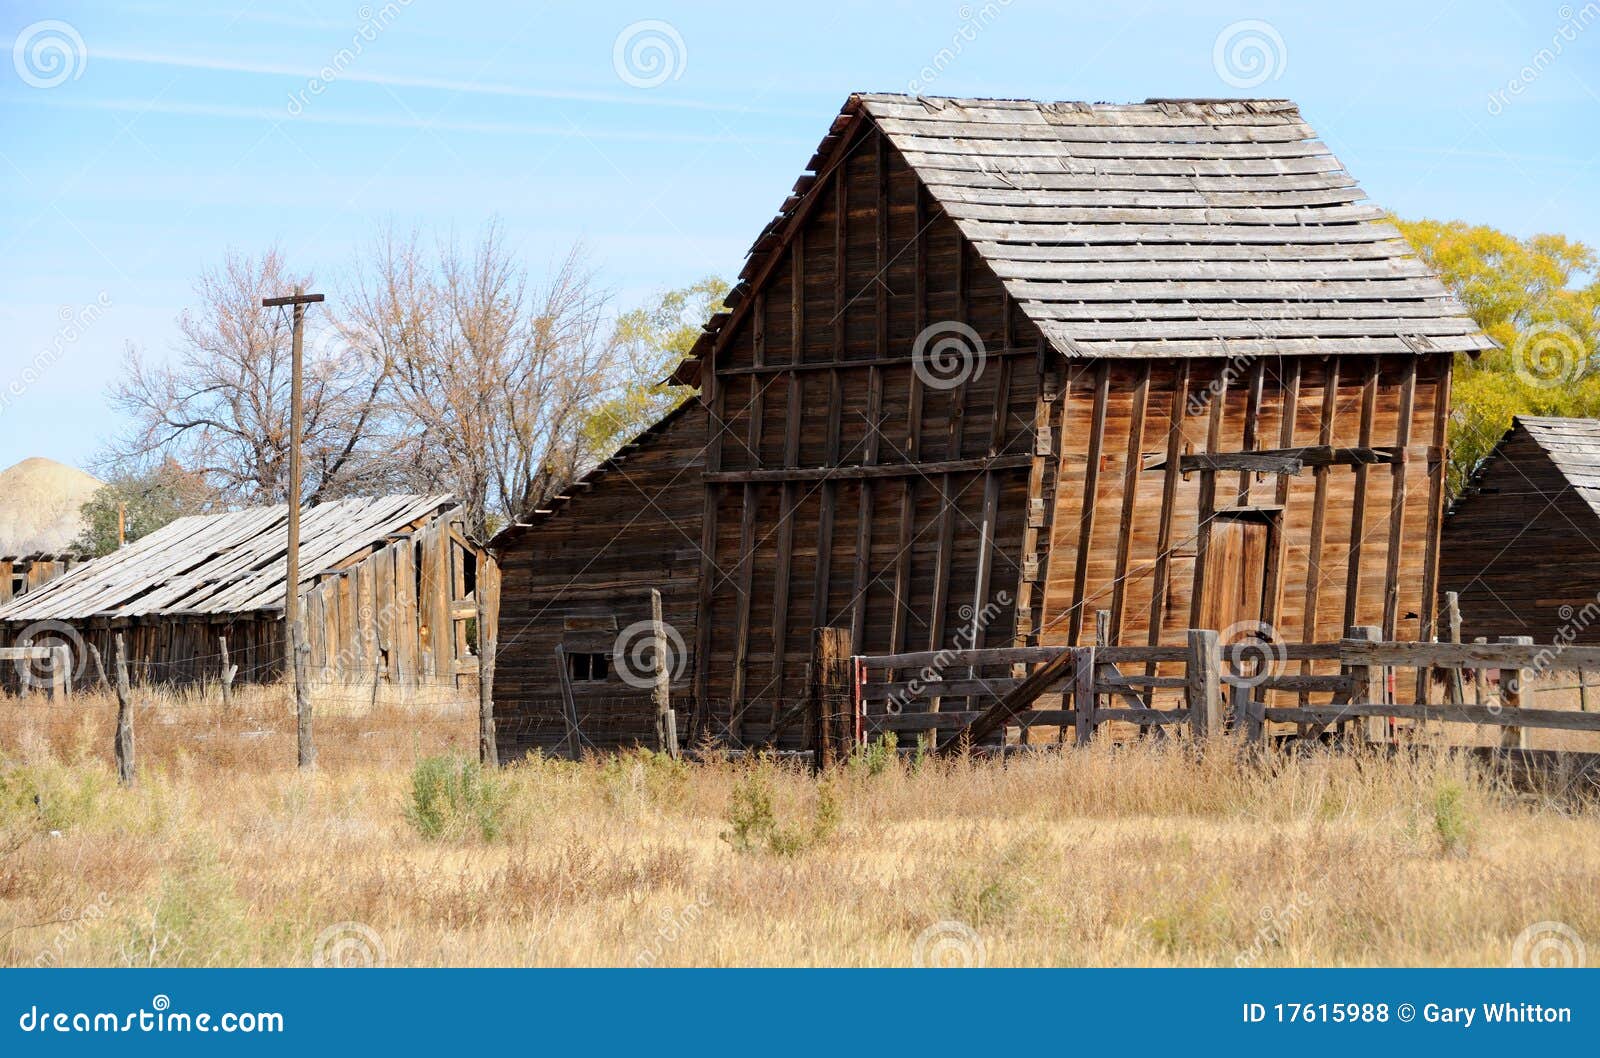 Old Shed In Farming Community Royalty Free Stock Photos - Image 